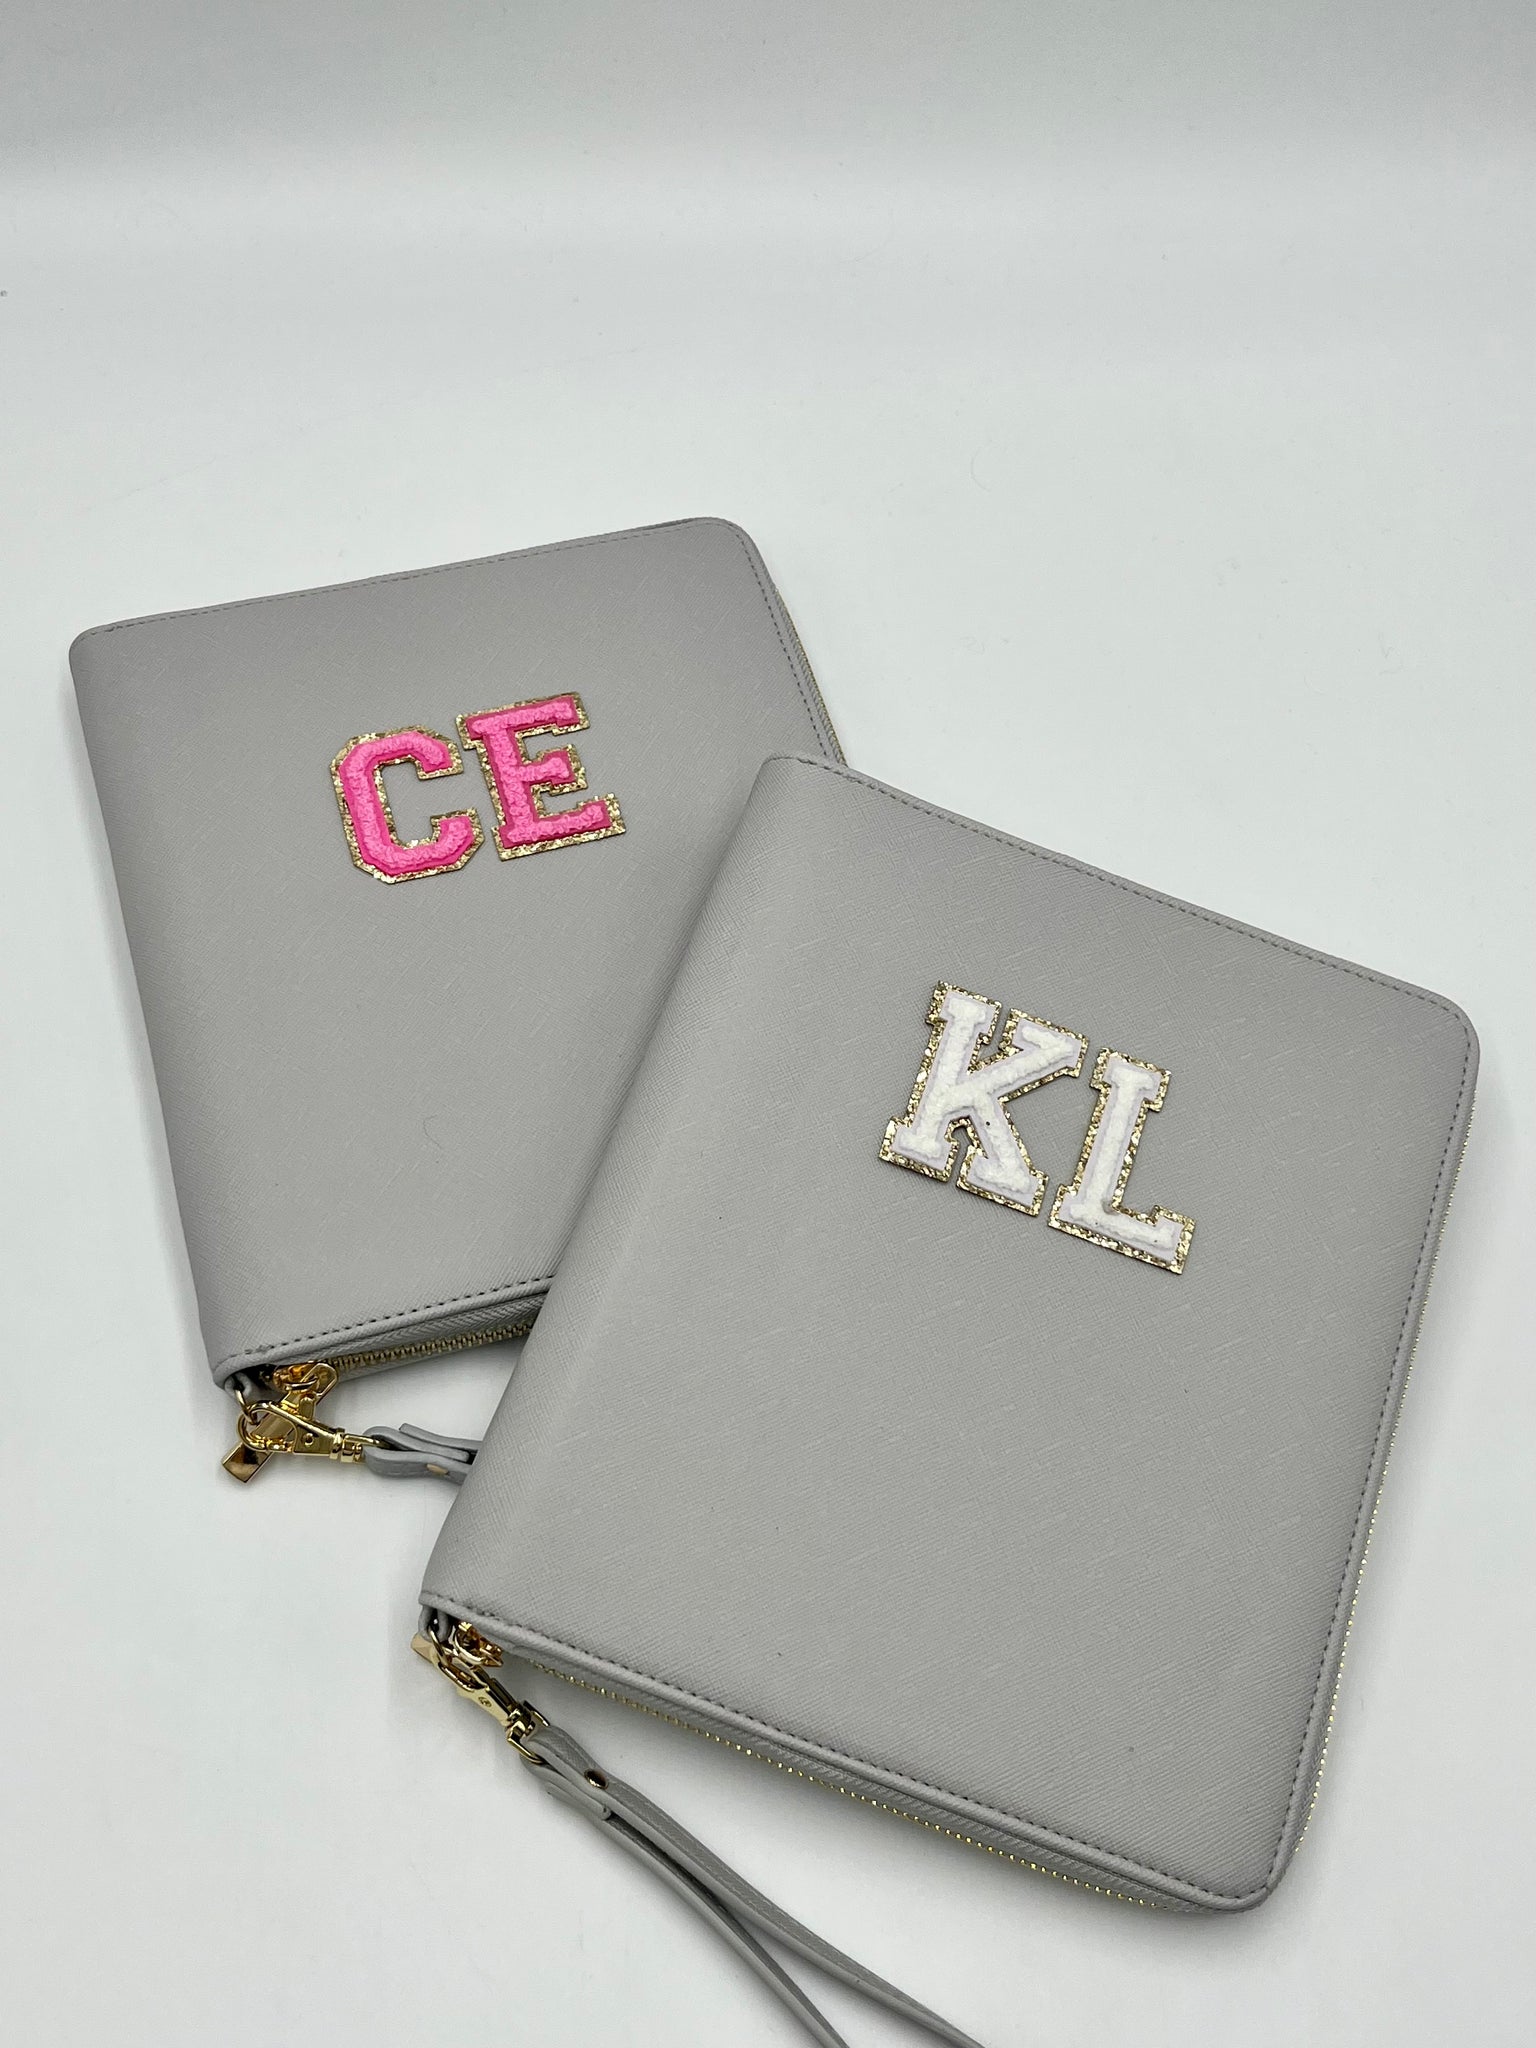 Personalised Travel Organisers - Glitter Letter Personalisation